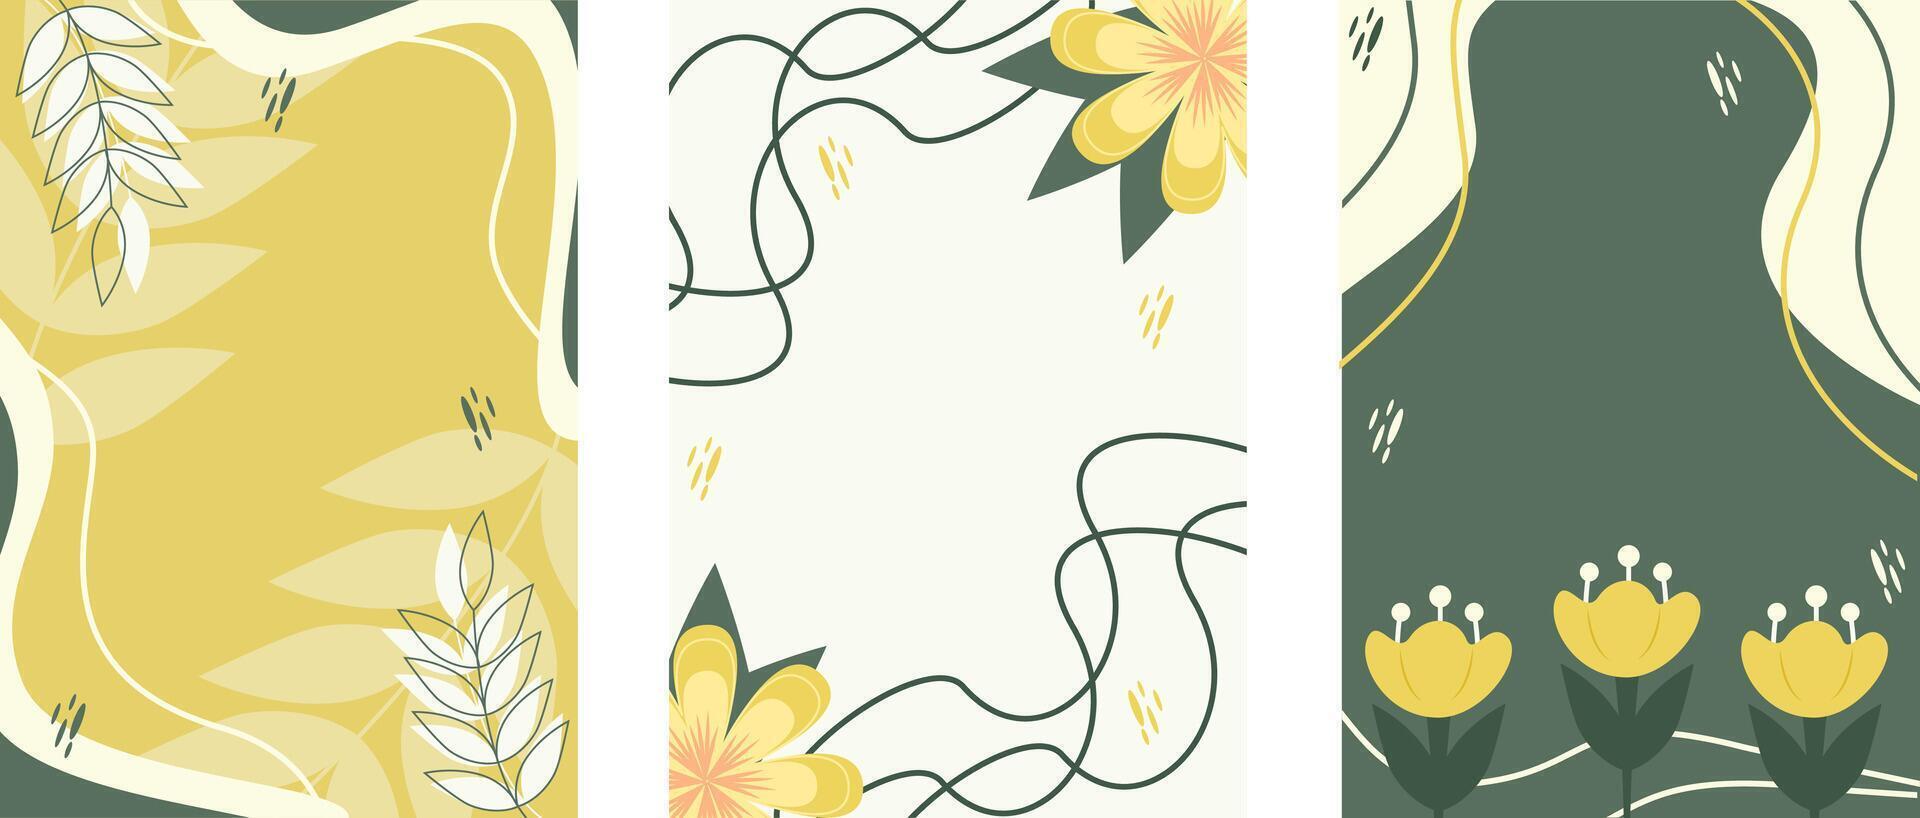 set of backgrounds with flowers and lines, green and yellow, illustration, for social networks, mockups and print vector